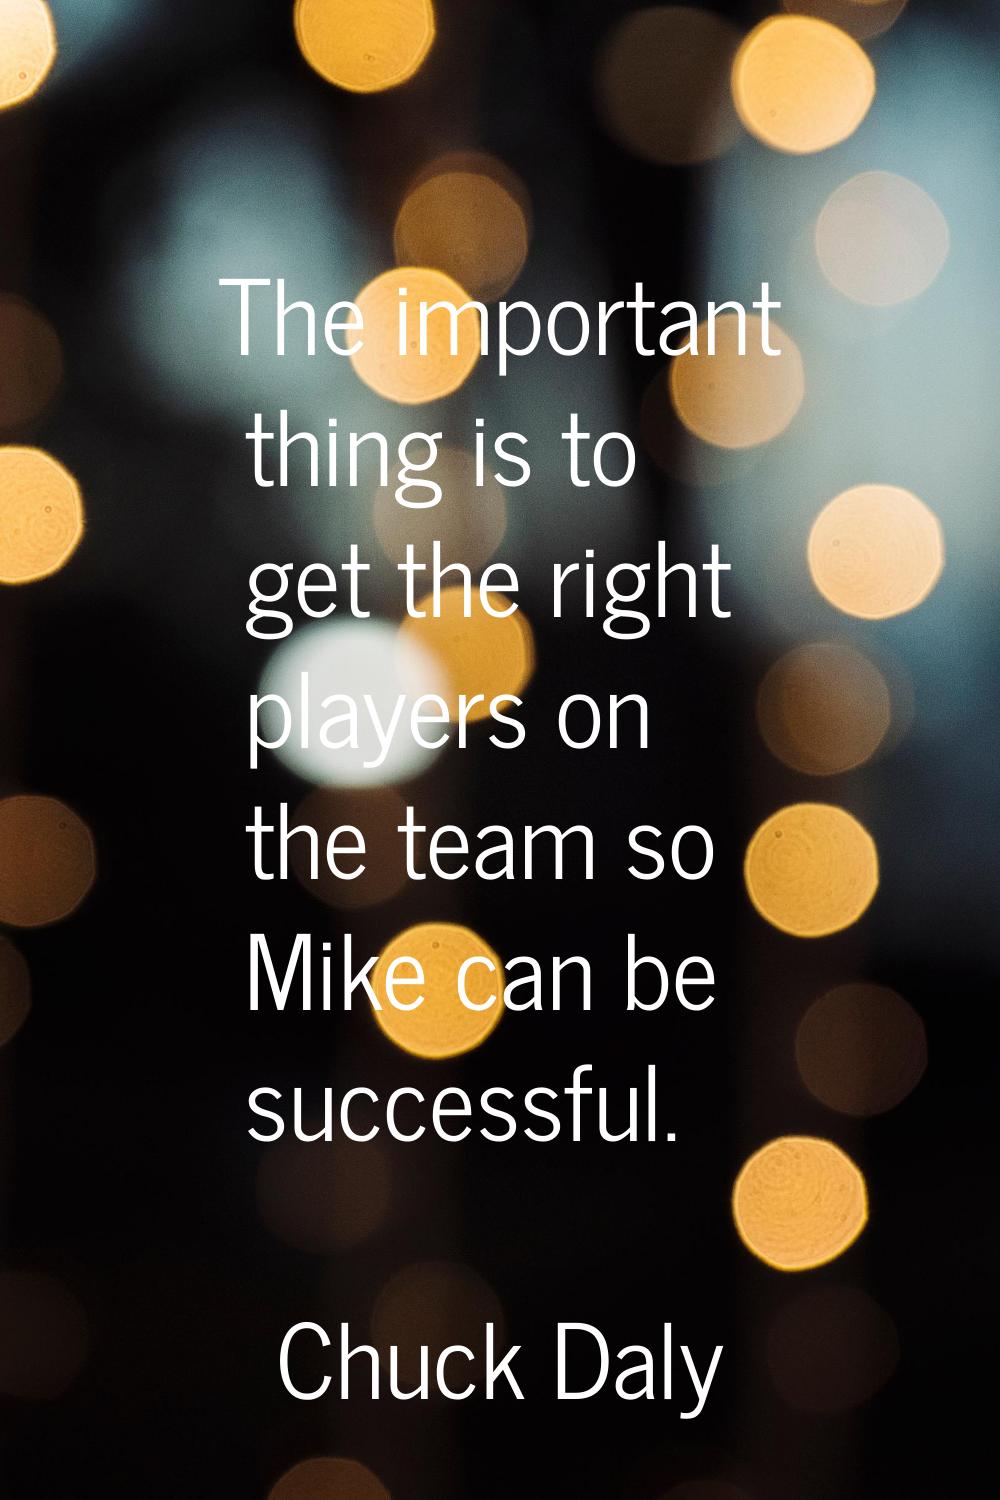 The important thing is to get the right players on the team so Mike can be successful.